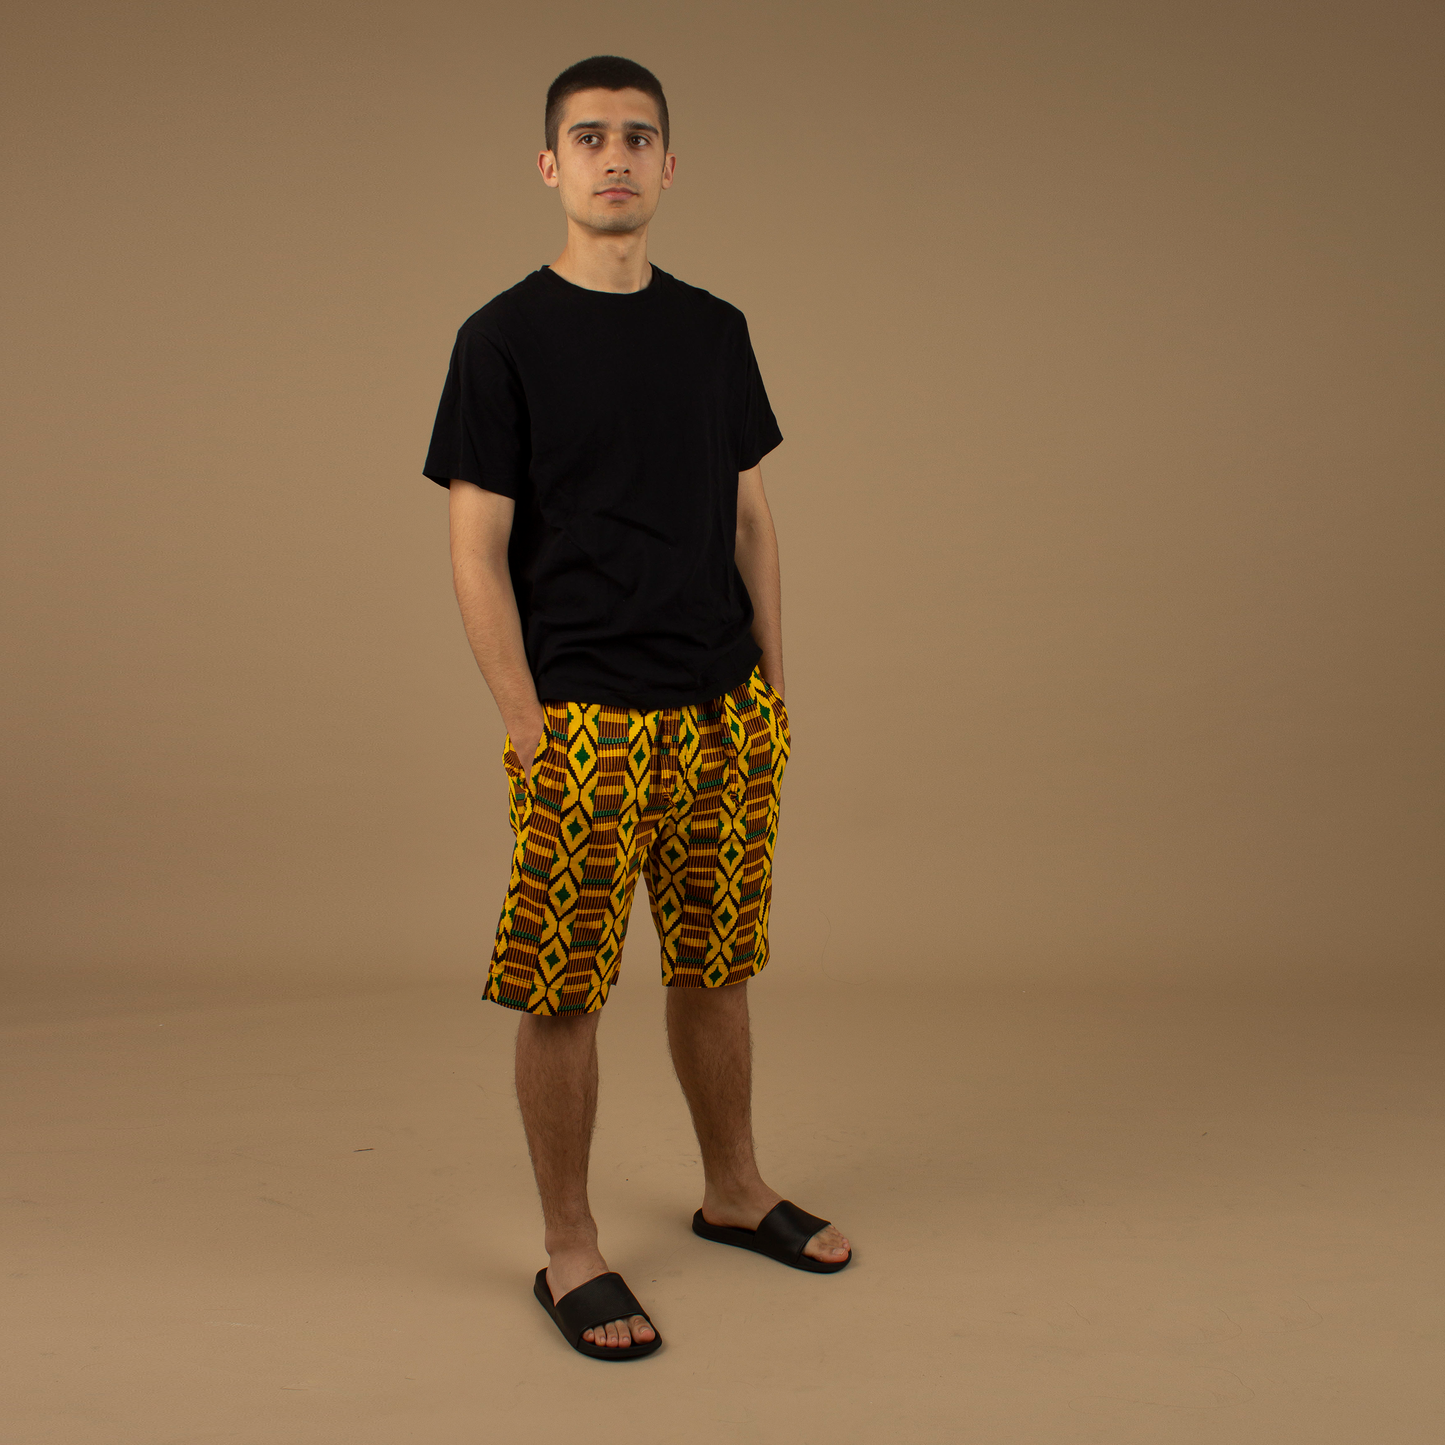 The Adina Kente African Print Shorts is a striking Diamond geometric kente pattern in green, yellow and black made from sustainably sourced 100% Cotton. Designed in England Made in Nigeria.